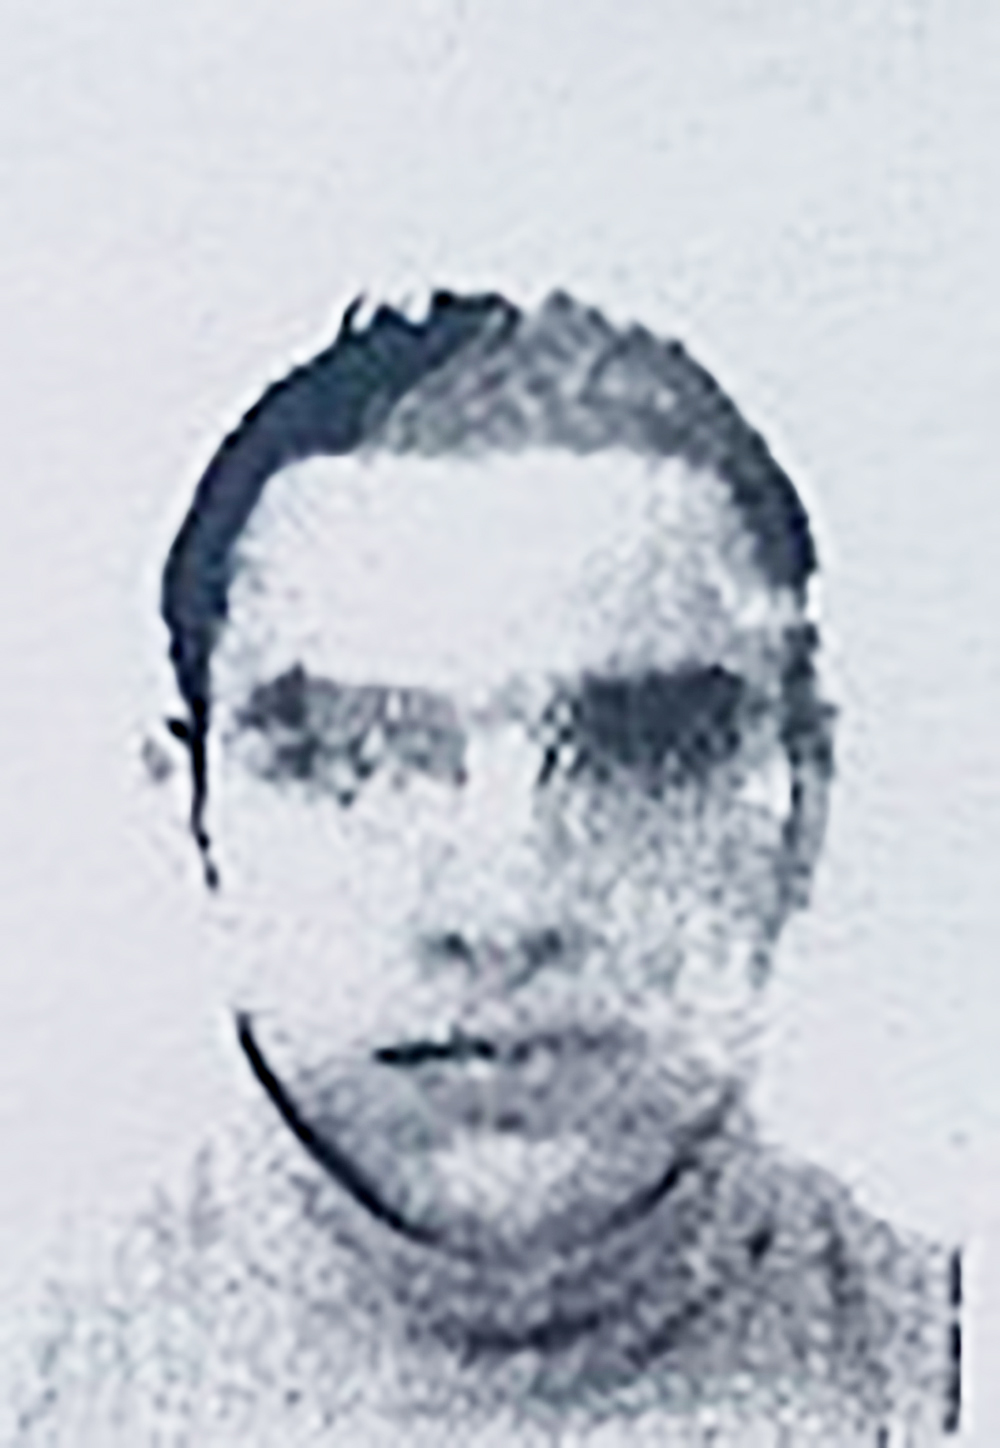 This image obtained by AFP from a French police source on July 15, 2016, shows a reproduction of the picture on the residence permit of Mohamed Lahouaiej-Bouhlel.